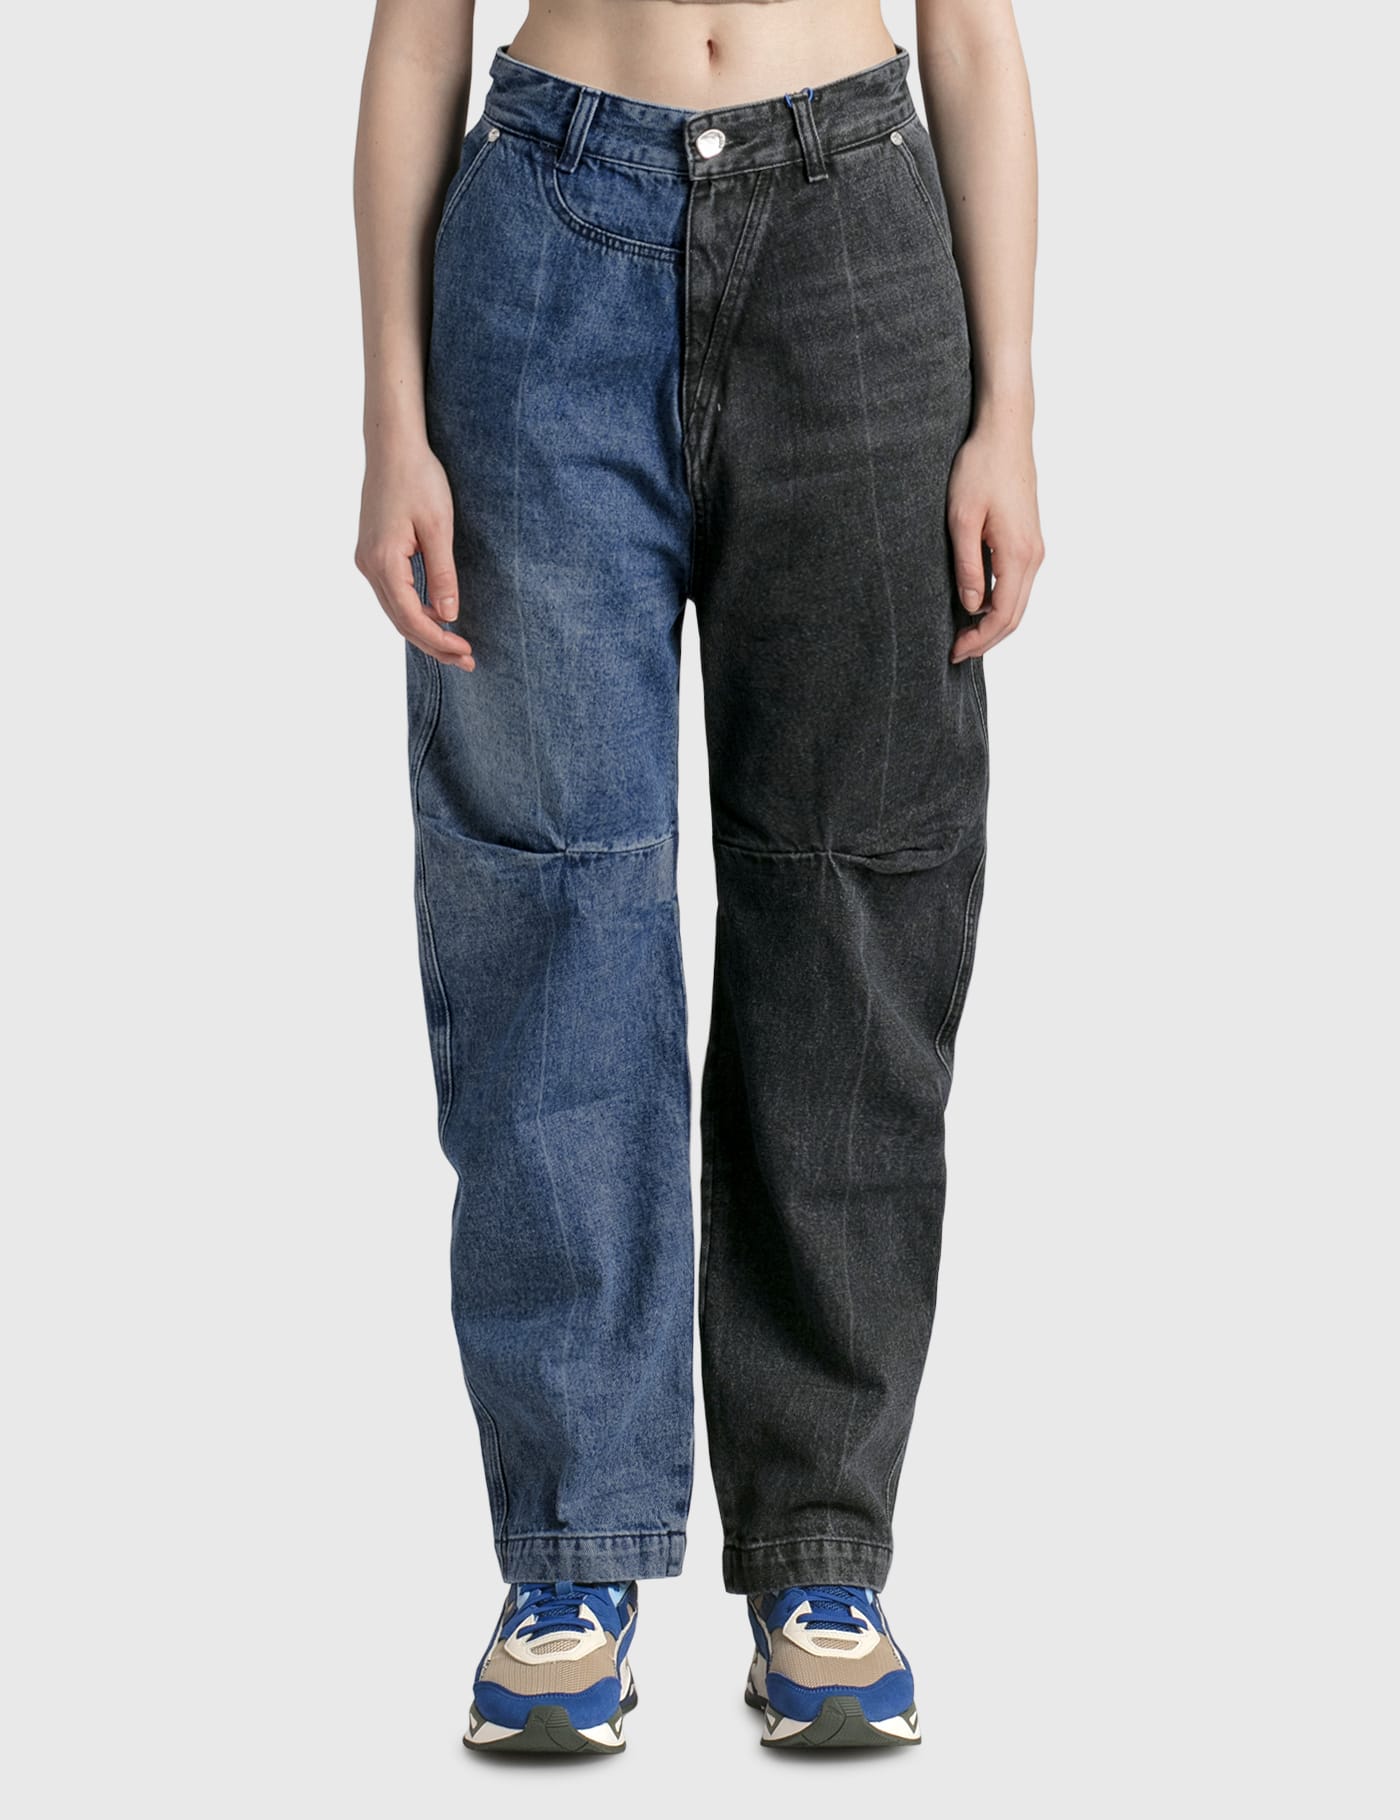 Ader Error - Eclipse Denim | HBX - Globally Curated Fashion and Lifestyle  by Hypebeast